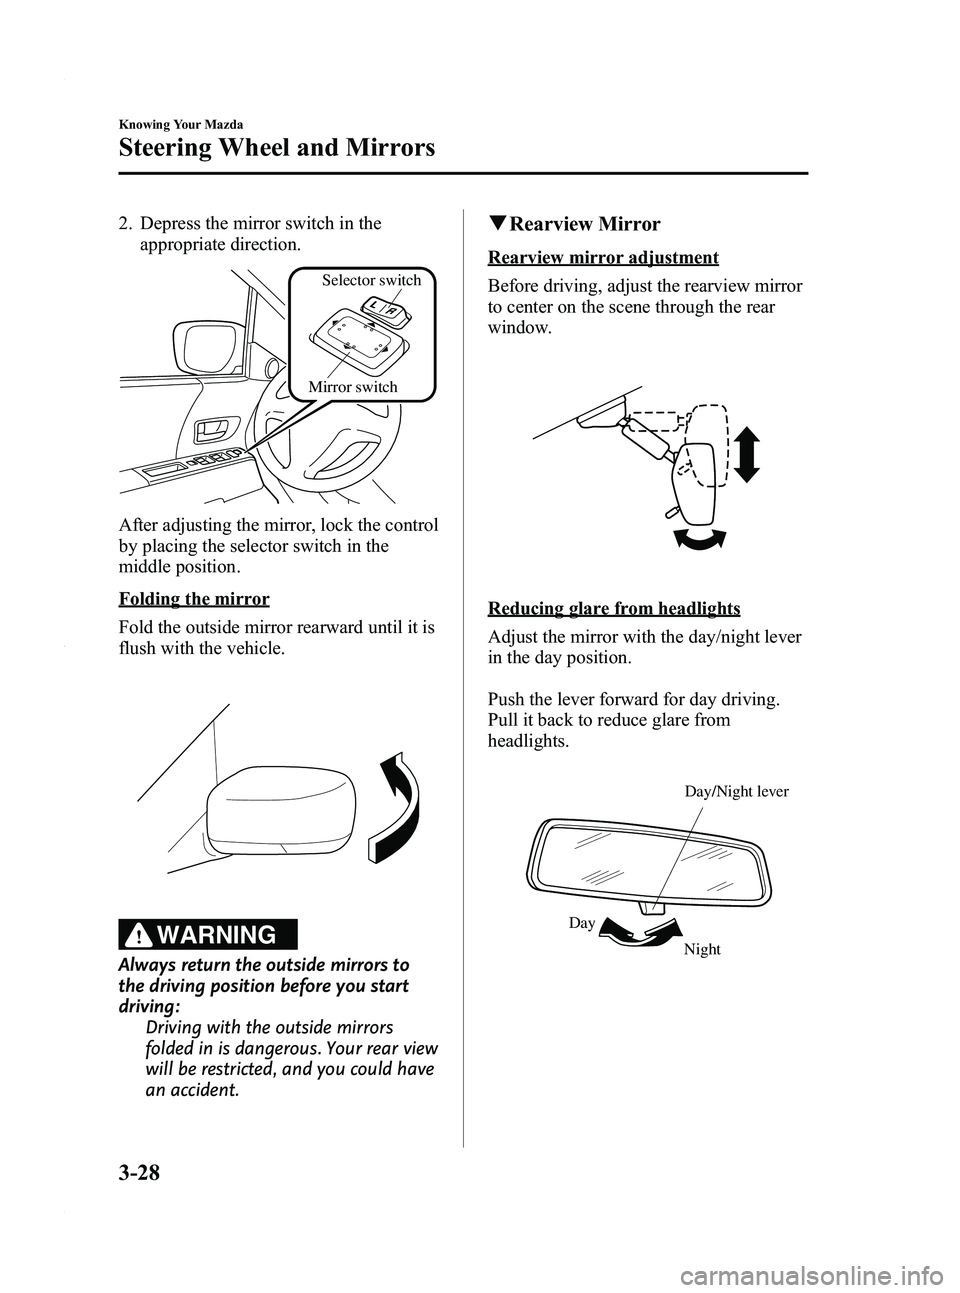 MAZDA MODEL 5 2010  Owners Manual Black plate (94,1)
2. Depress the mirror switch in theappropriate direction.
Mirror switchSelector switch
After adjusting the mirror, lock the control
by placing the selector switch in the
middle posi